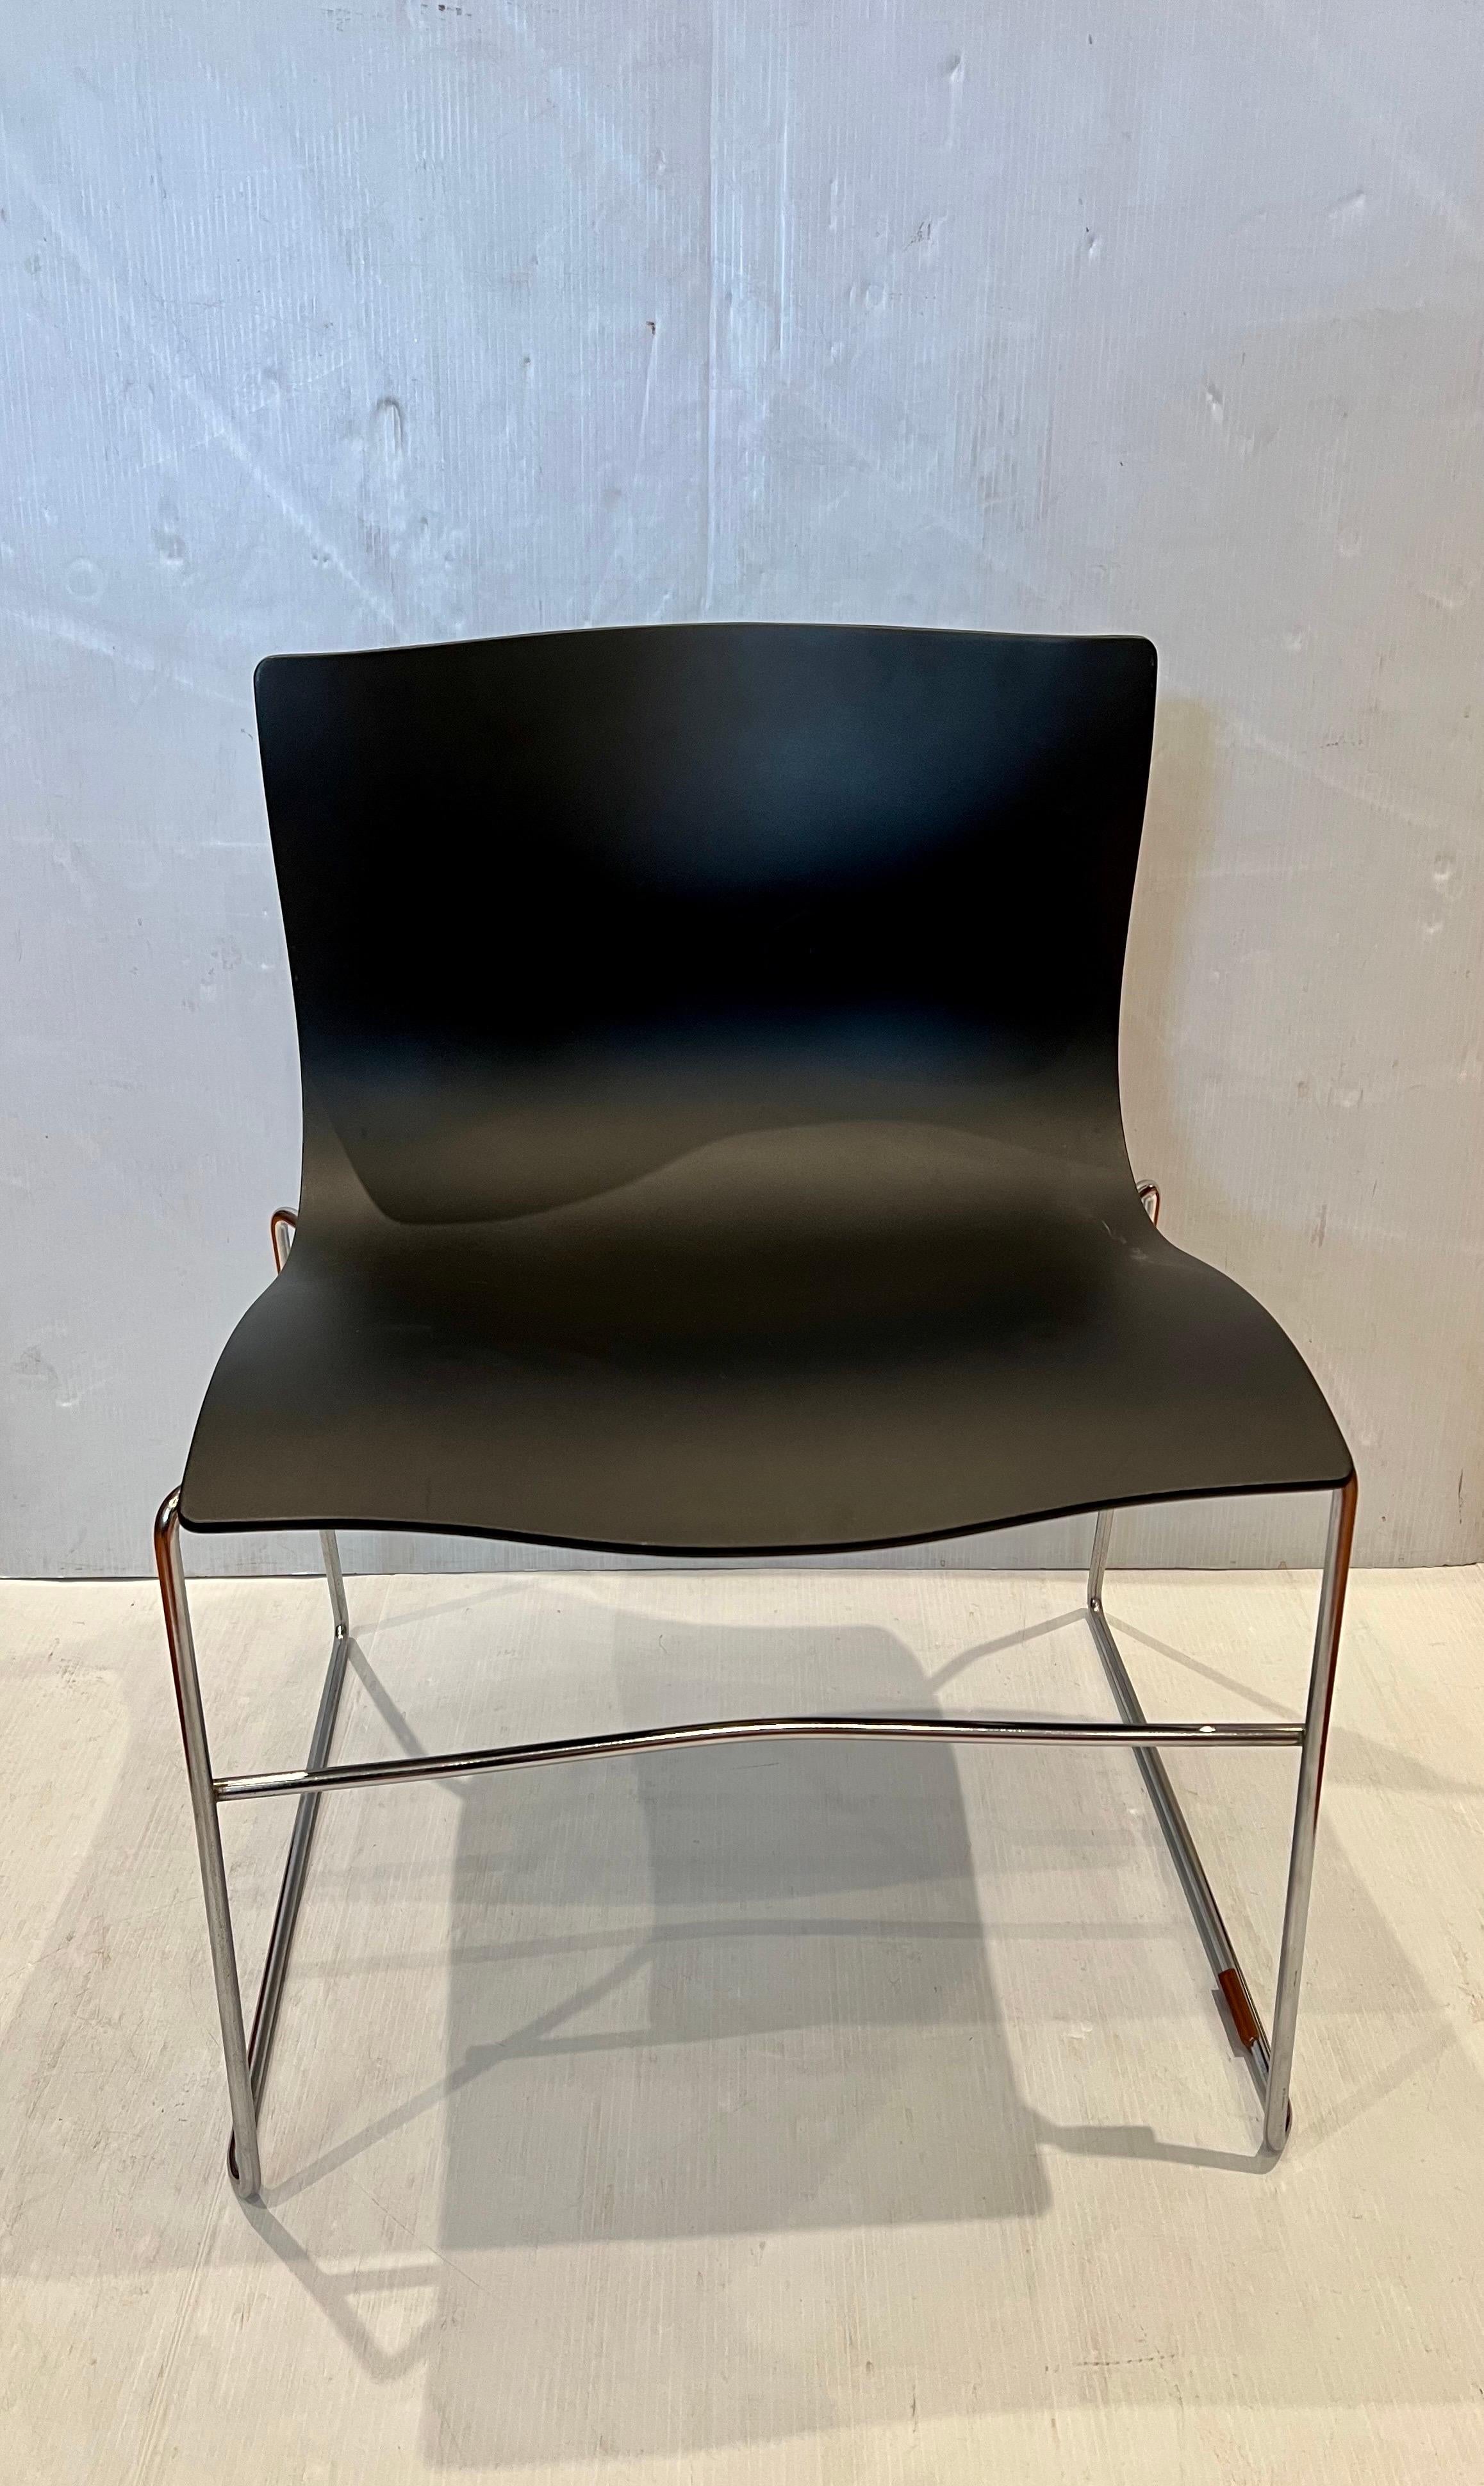 Set Handkerchief 4 Chairs in Black &Chrome Designed by Vignelli for Knoll Studio In Good Condition In San Diego, CA